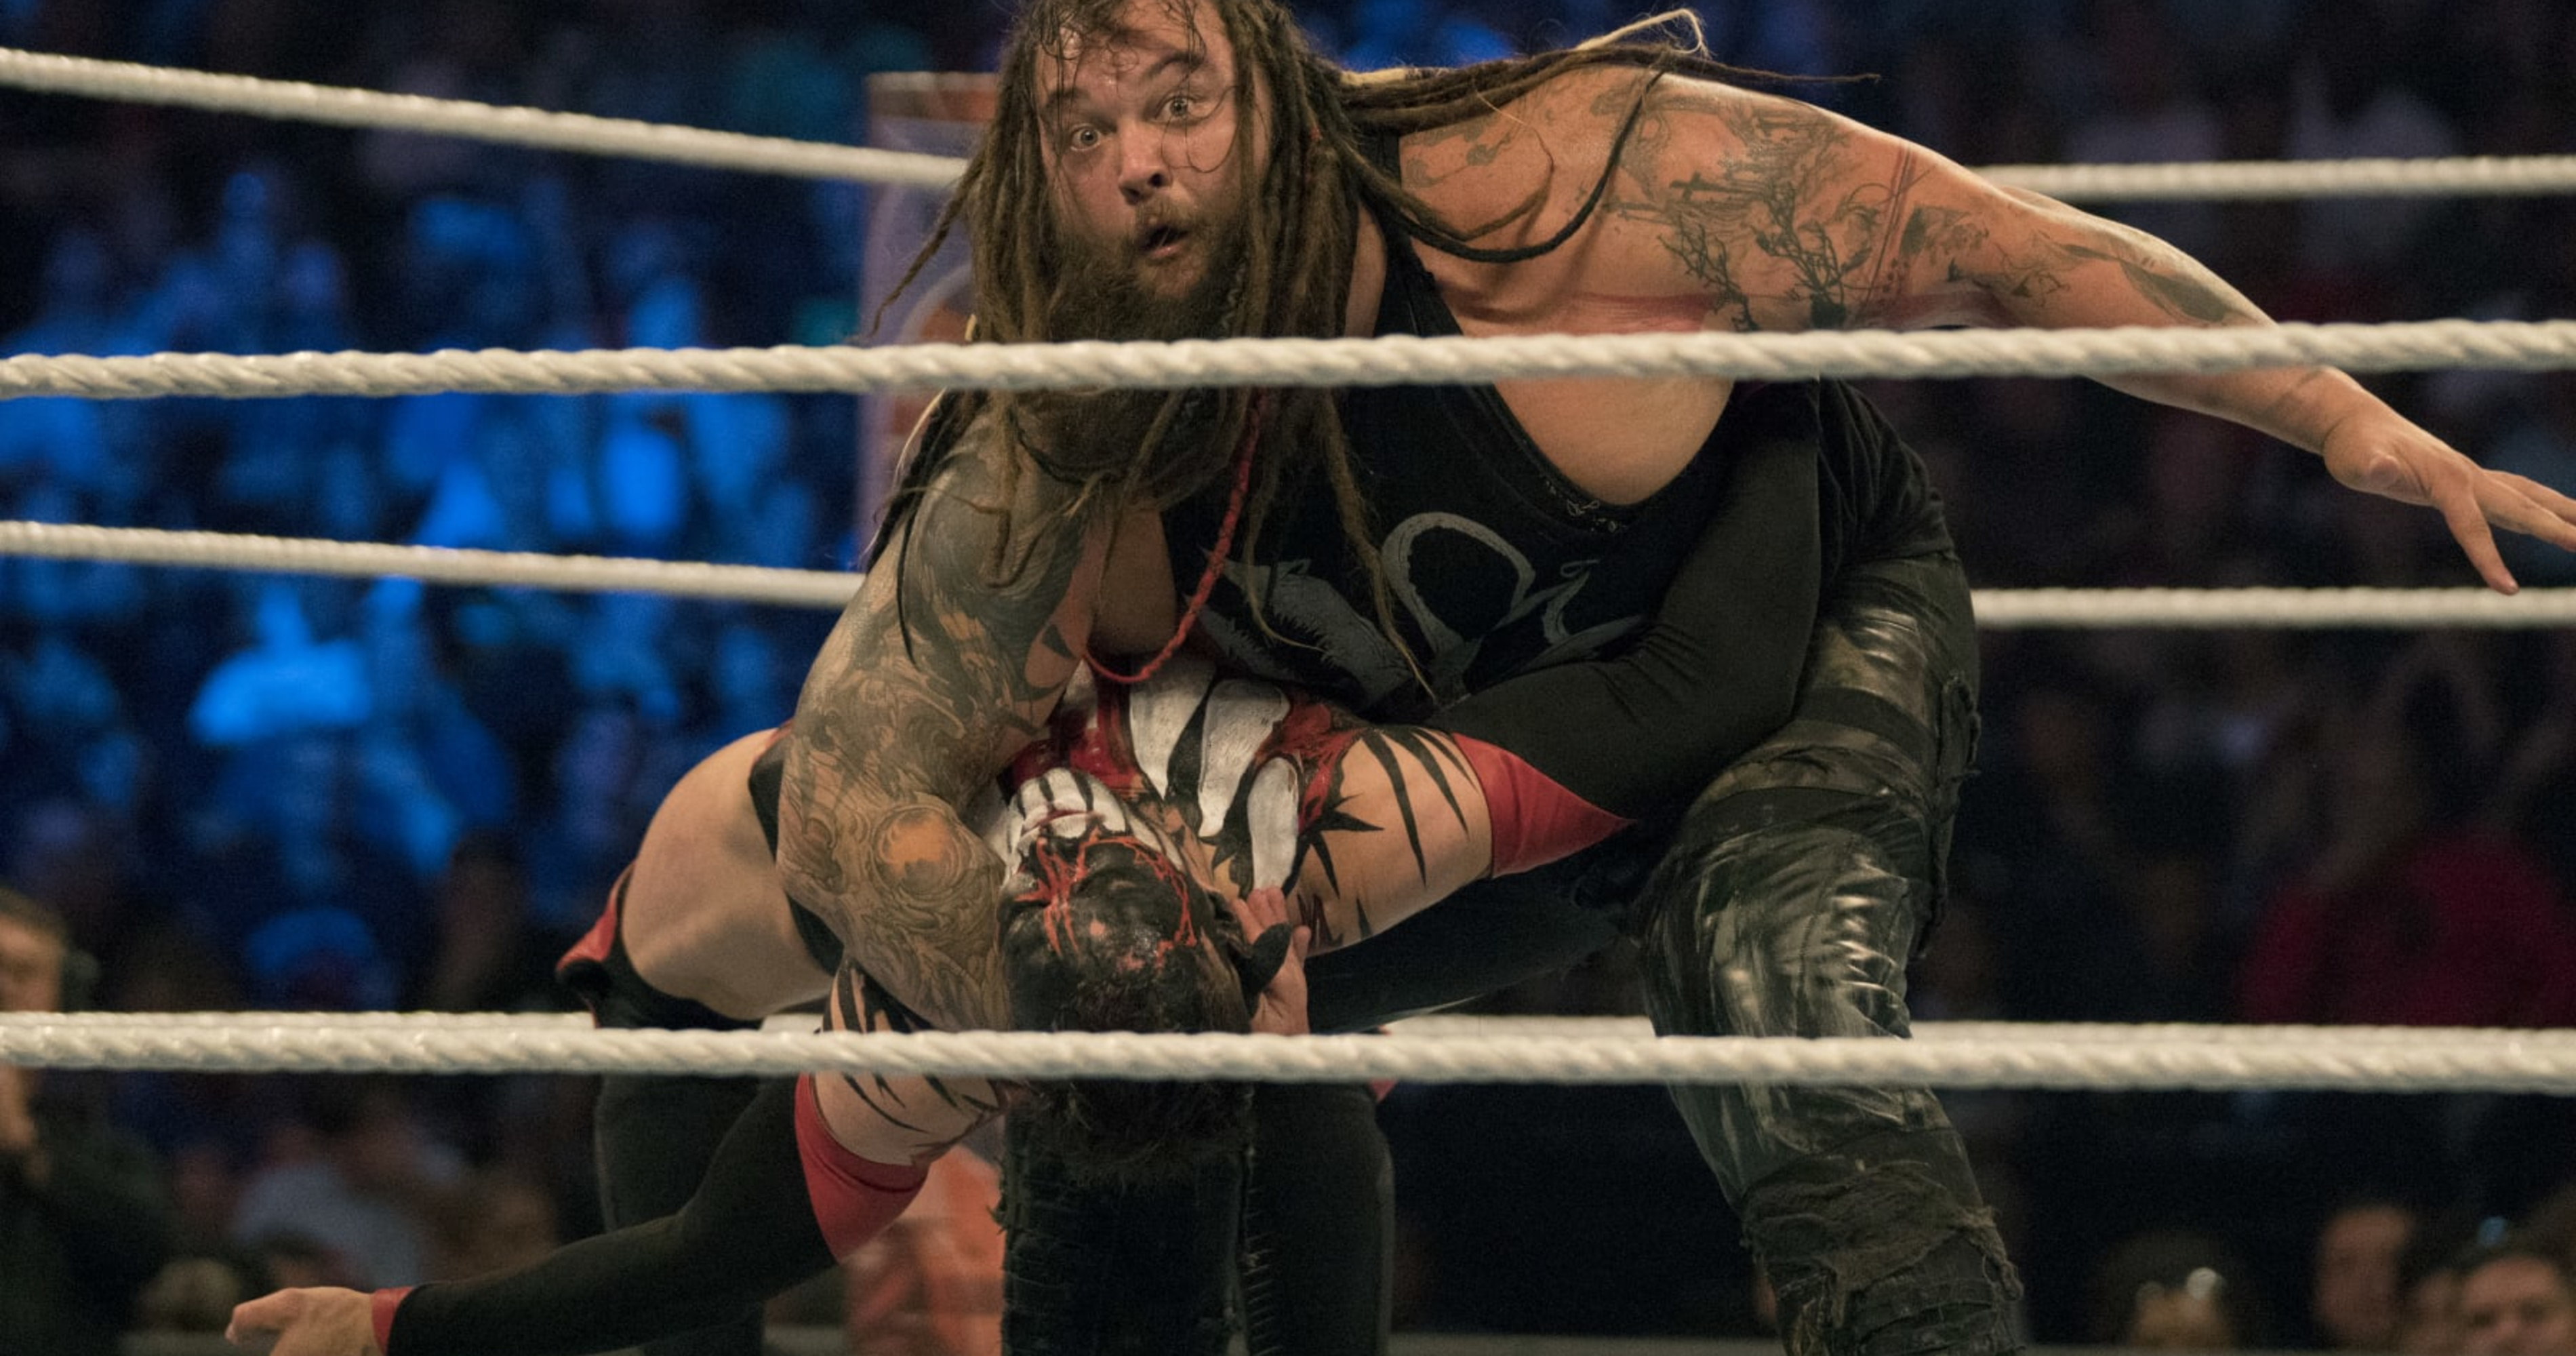 Looking Back At WWE Star Bray Wyatt's Career Highlights And Legacy